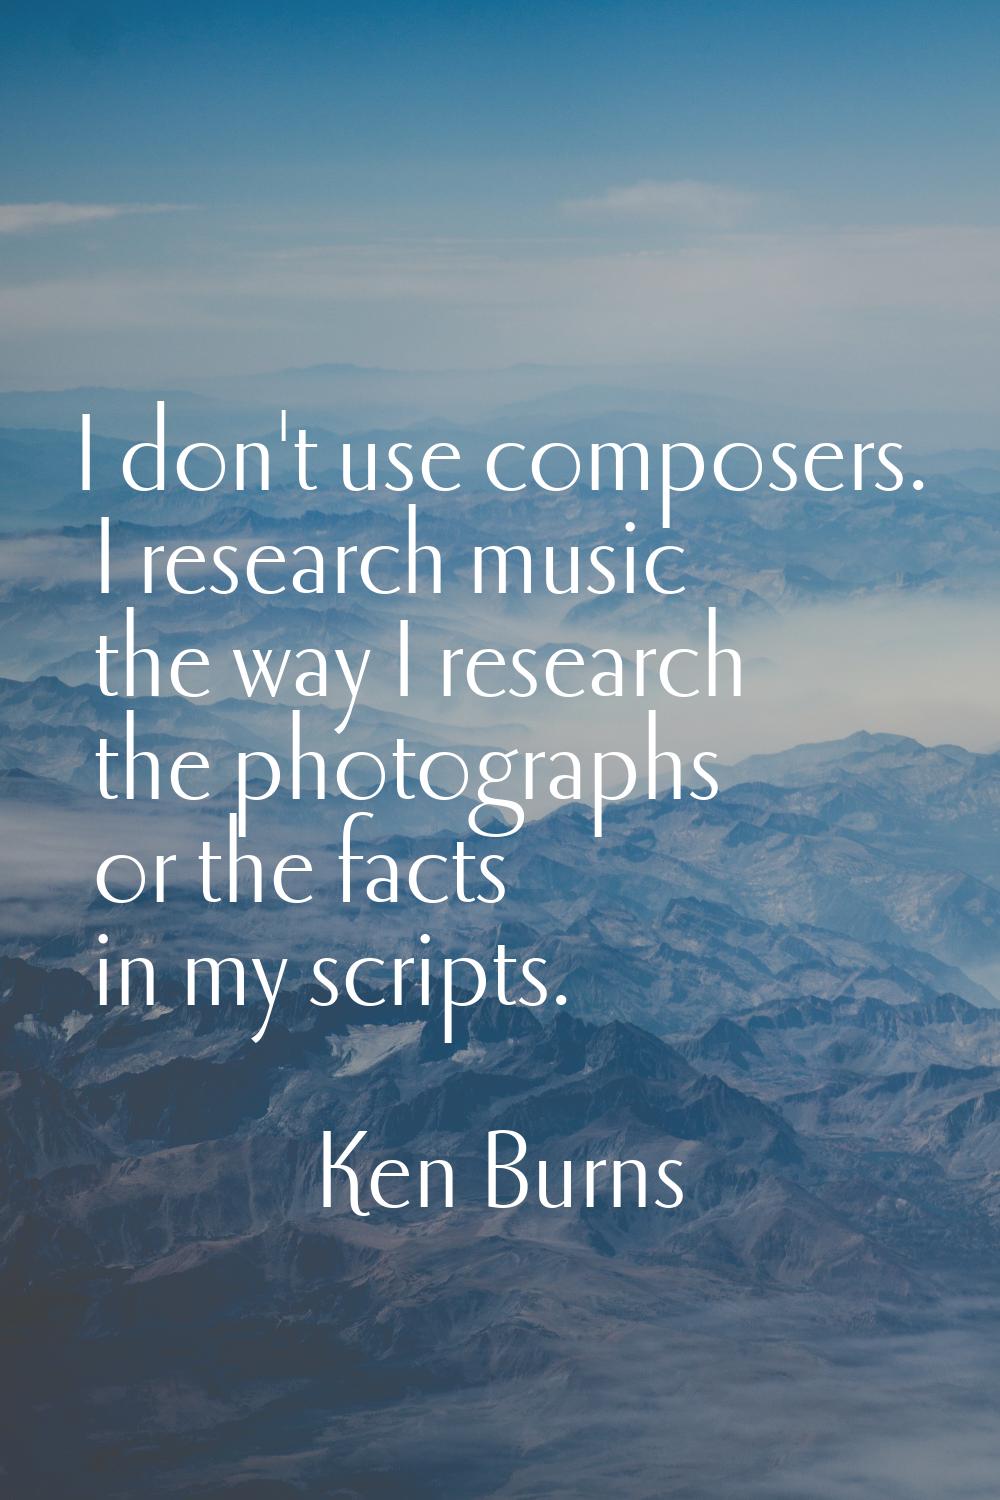 I don't use composers. I research music the way I research the photographs or the facts in my scrip